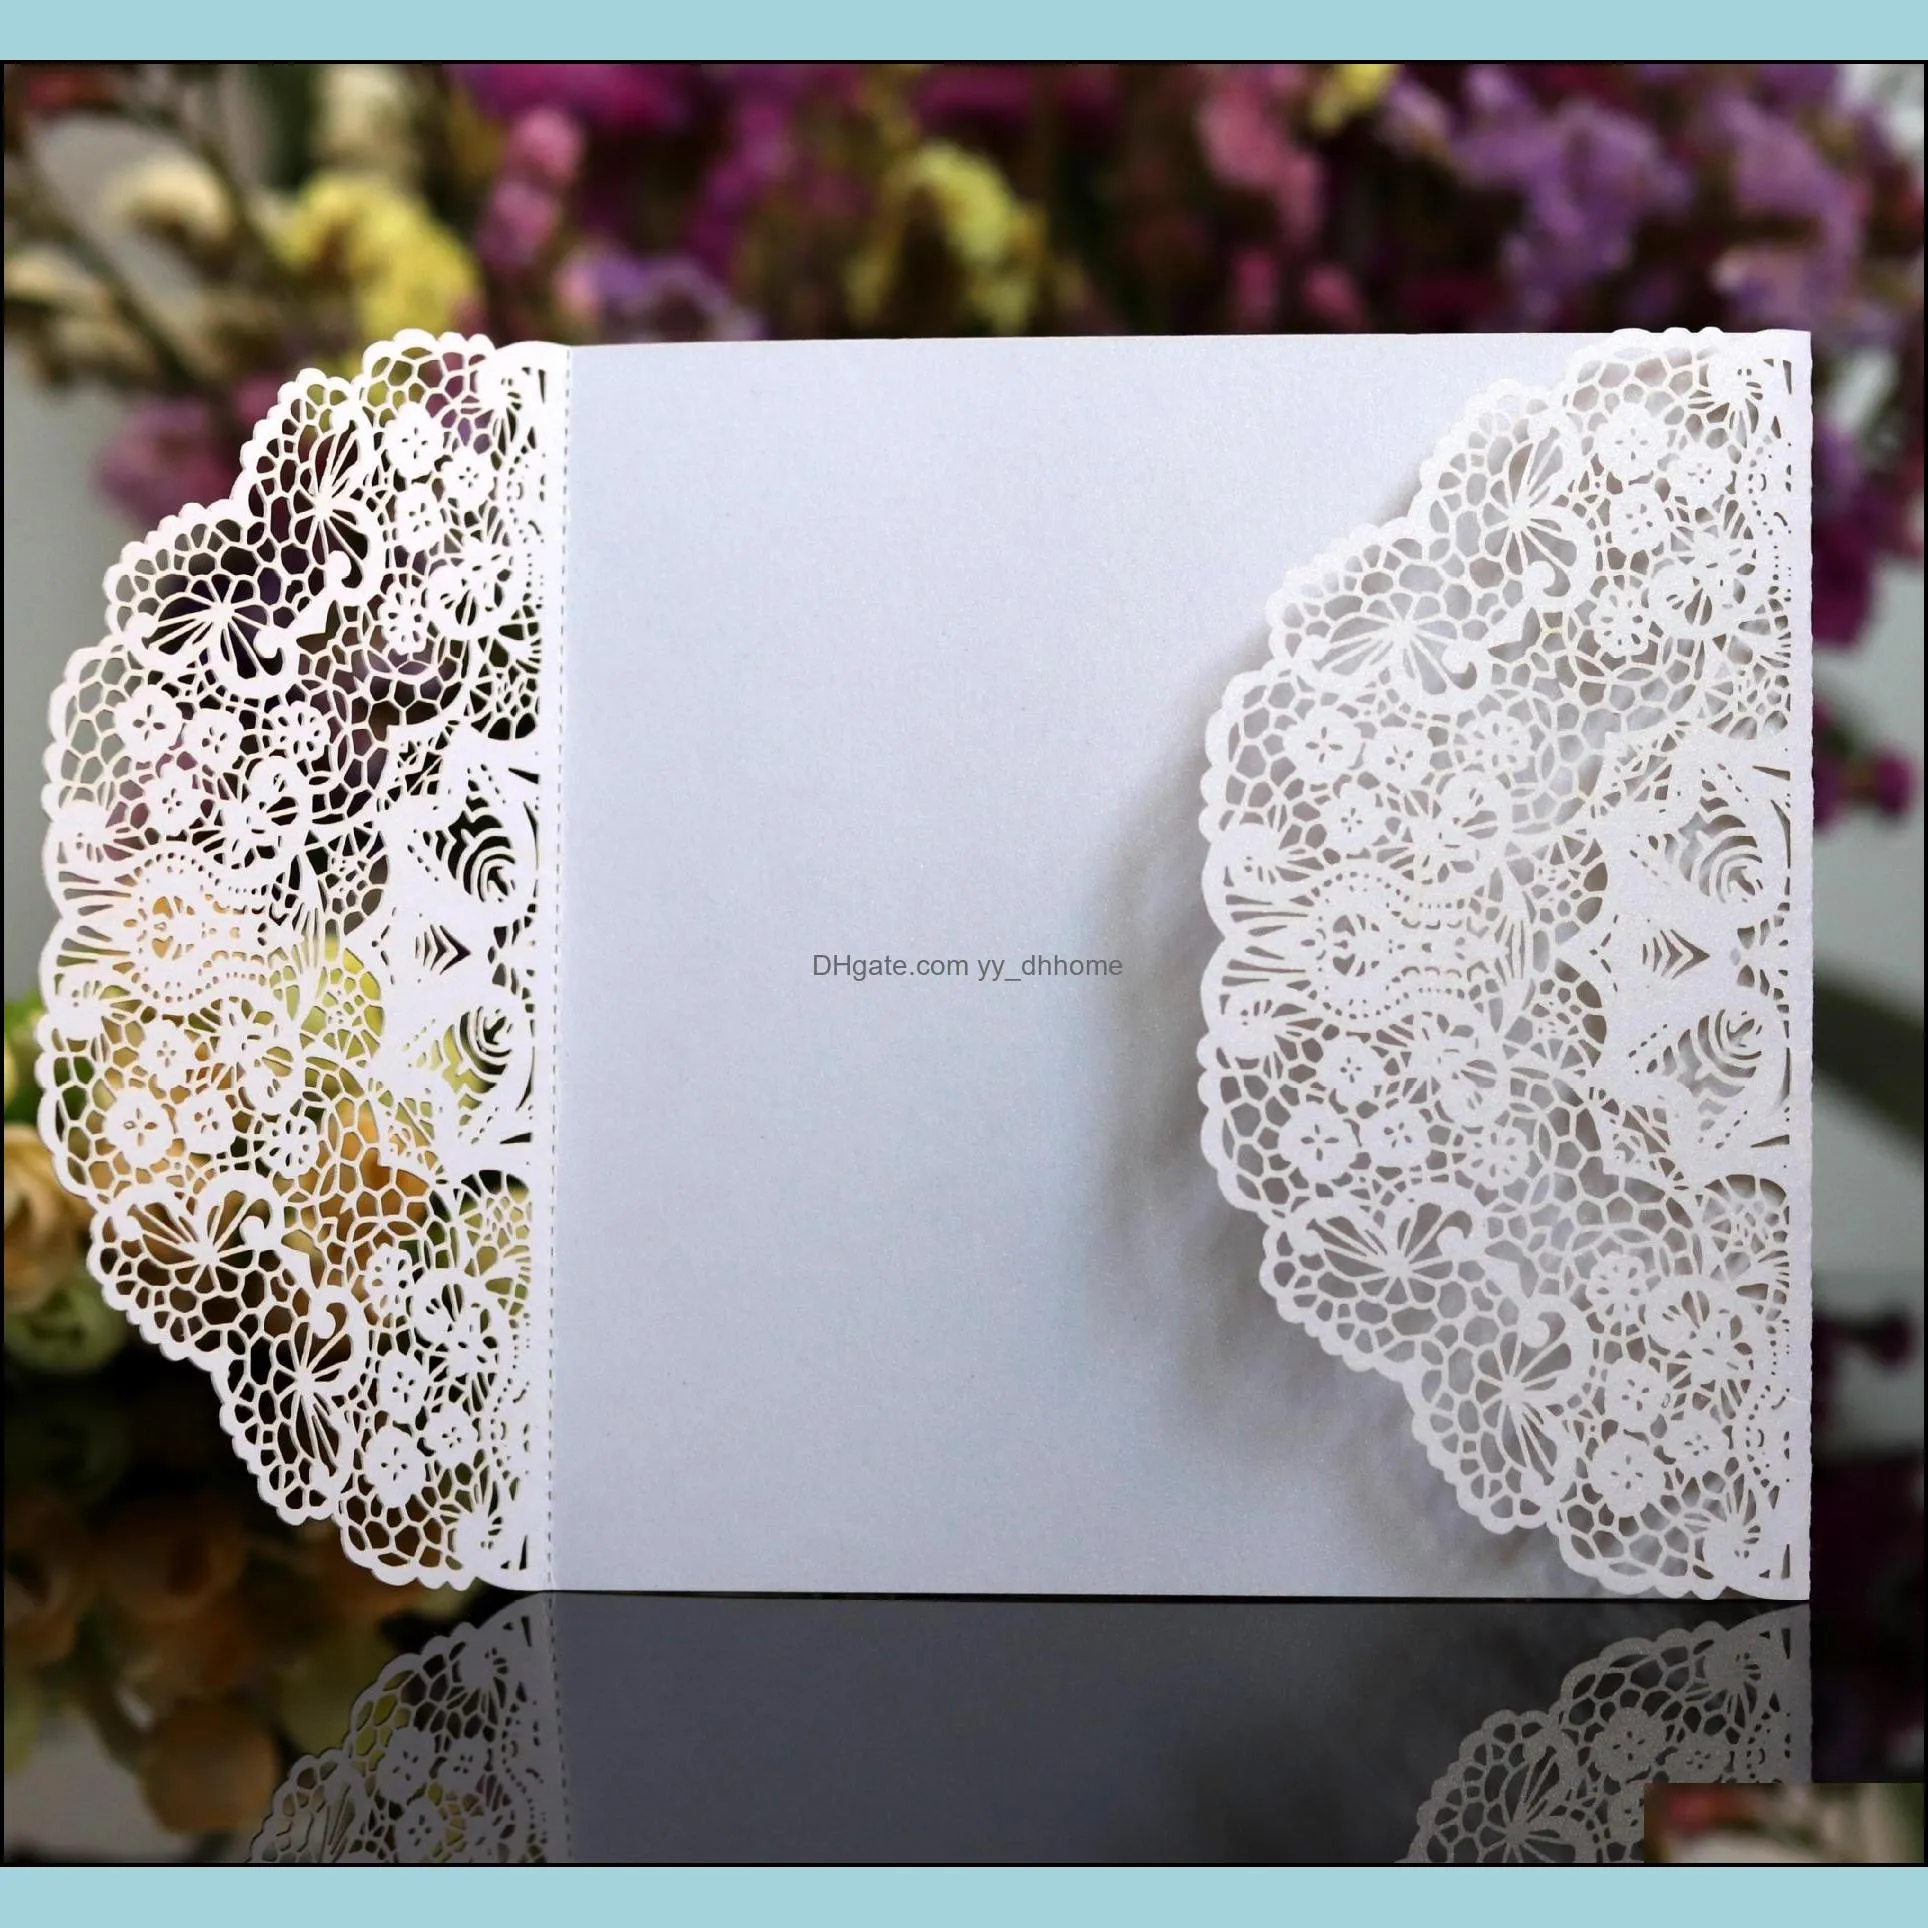 NEWWedding Invitation Cards Bowknot lace floral Laser Cut Hollow out cover full set Exquisite Greeting Cards Engagement Party Supplies